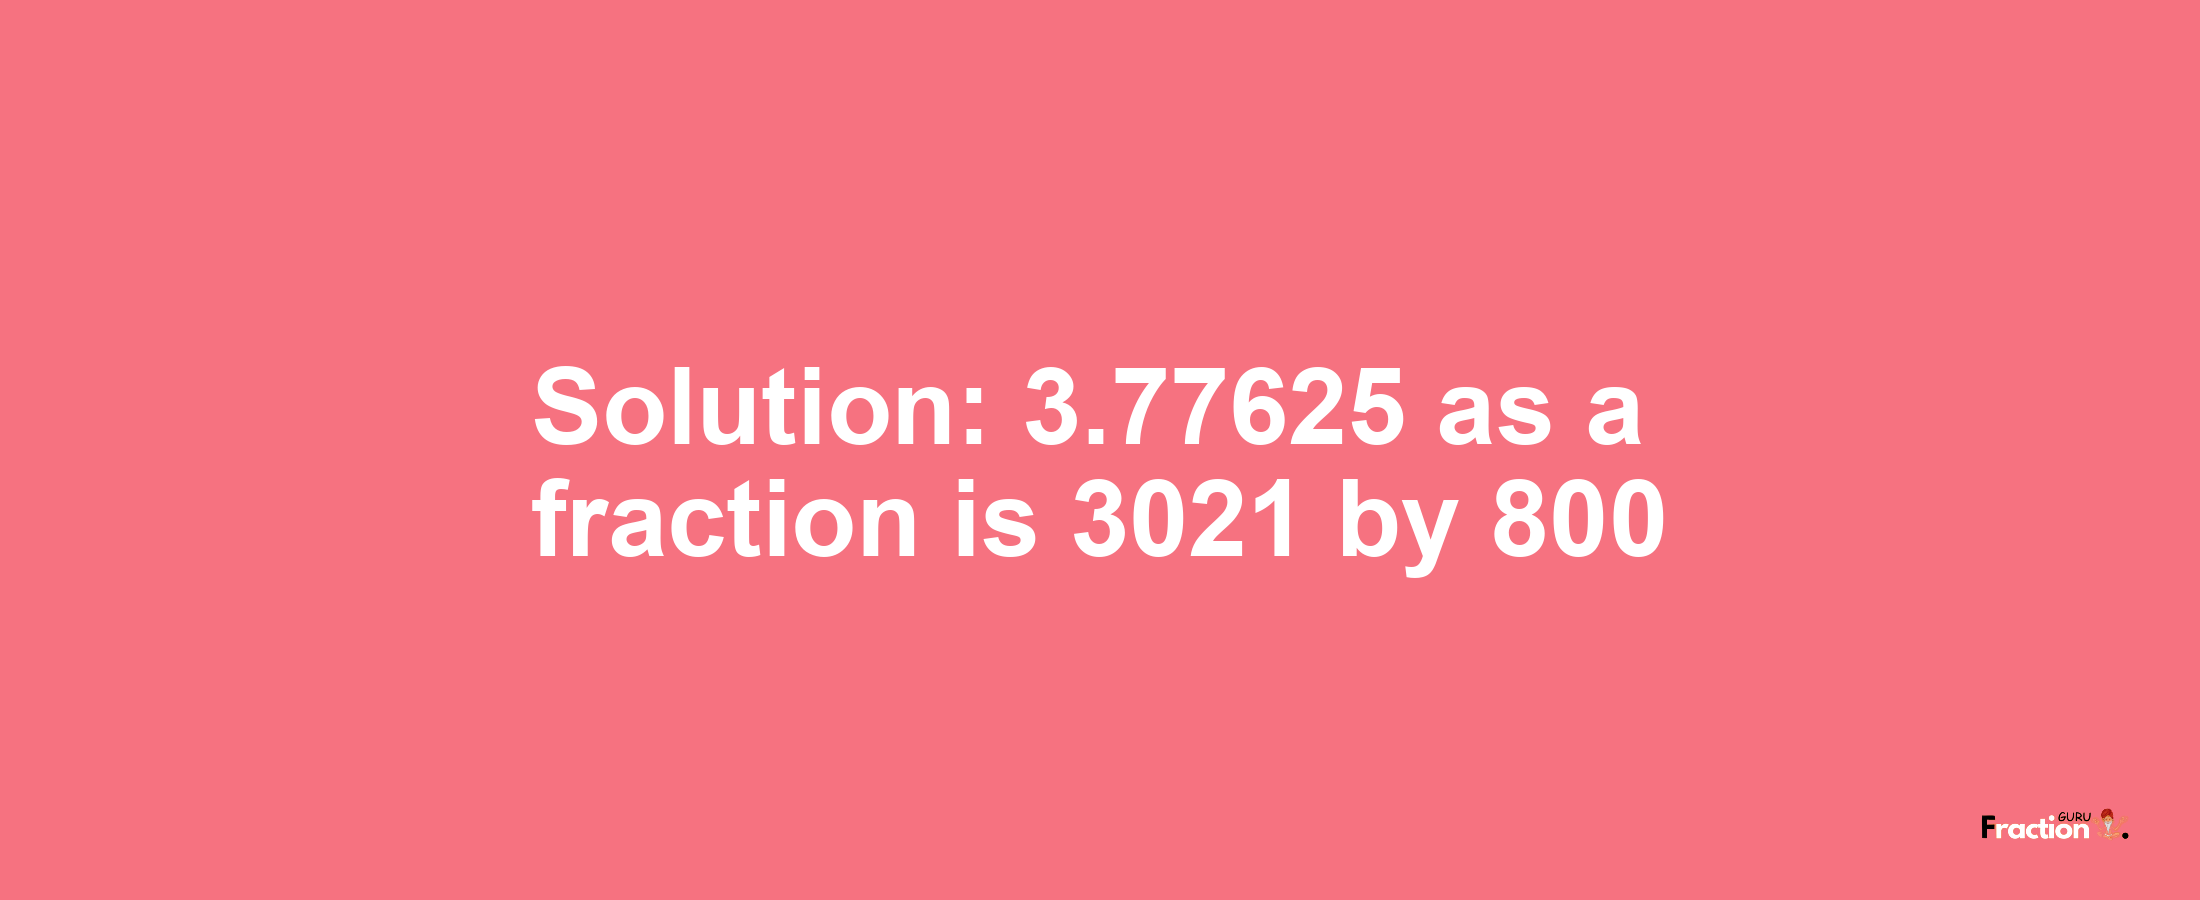 Solution:3.77625 as a fraction is 3021/800